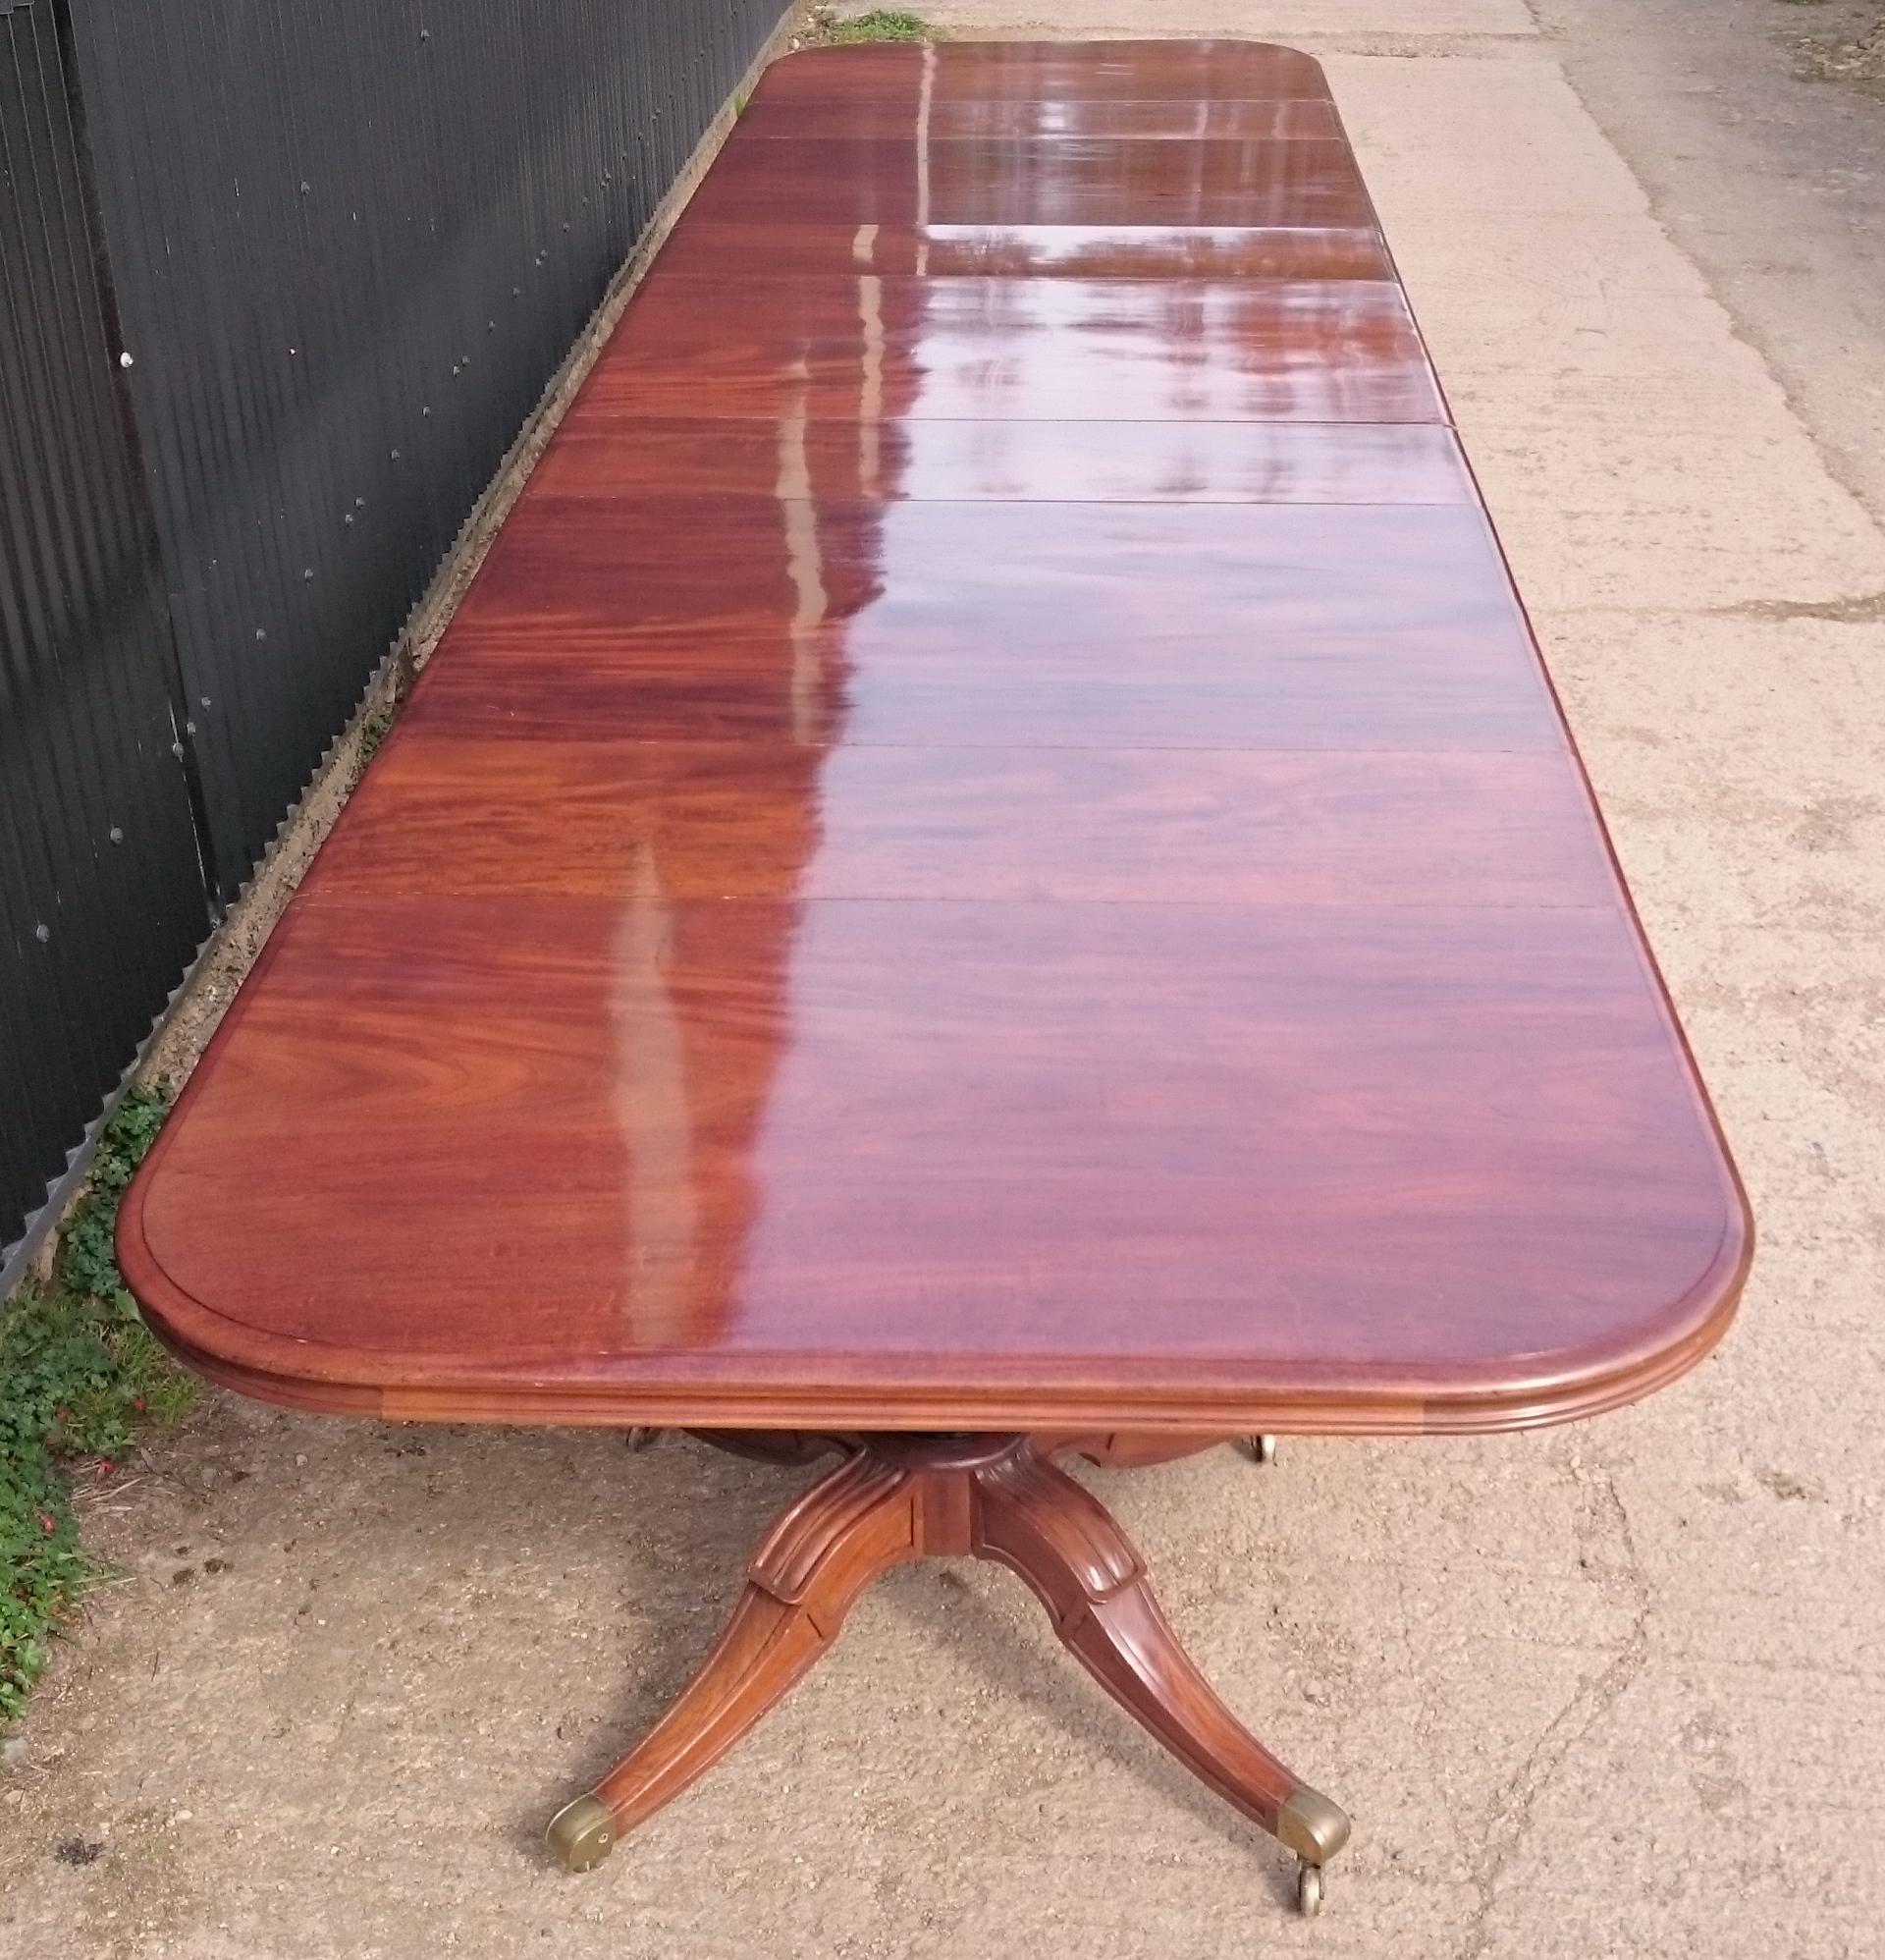 Regency Very Large Early Nineteenth Century Five Pedestal Irish Antique Dining Table For Sale